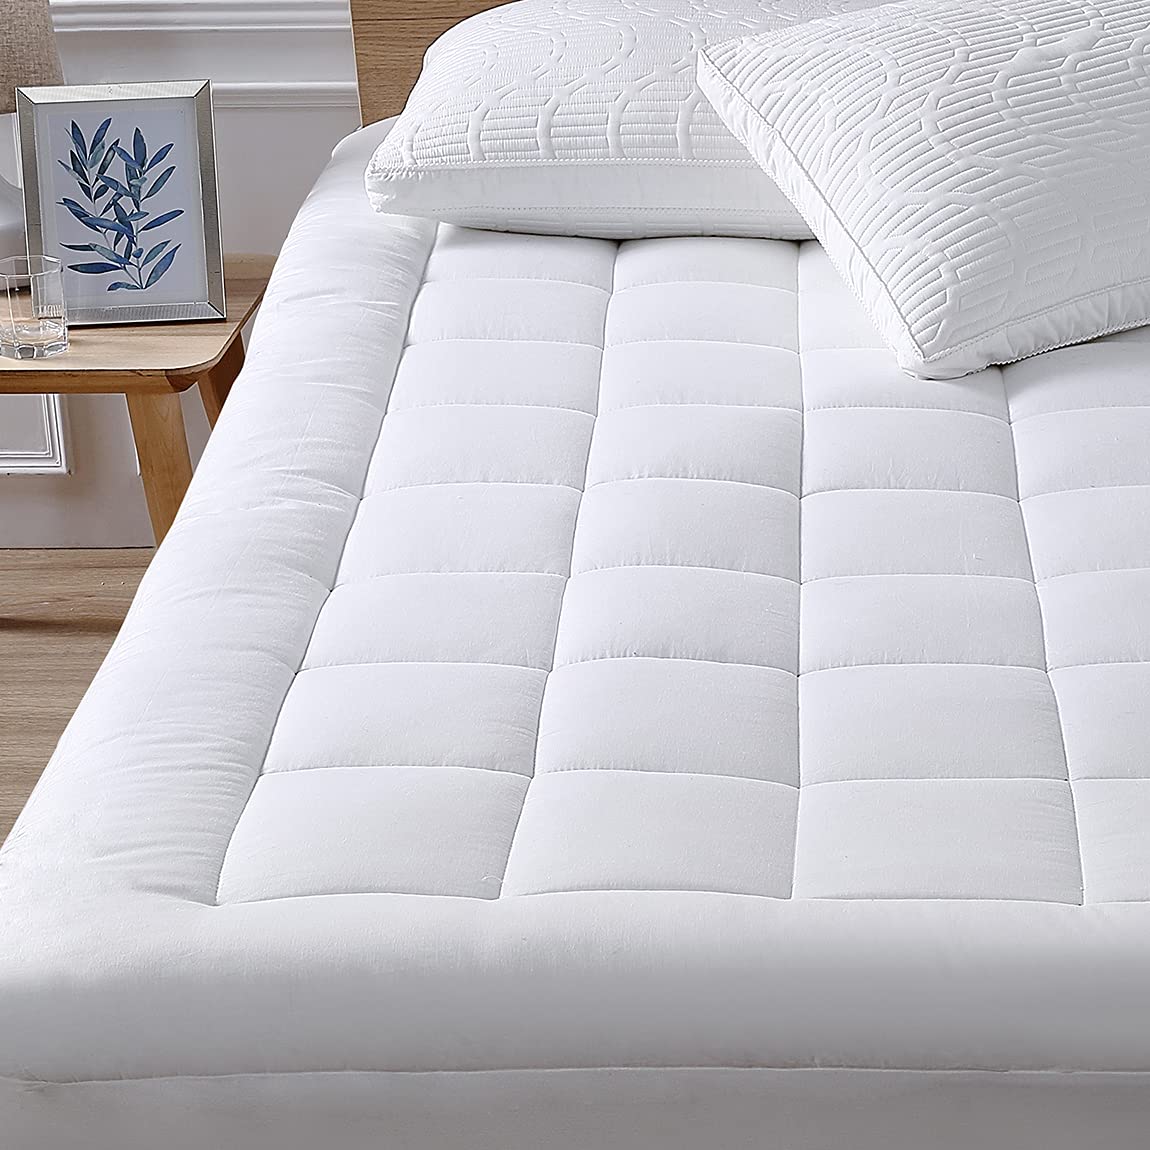 Cooling mattress pads and toppers